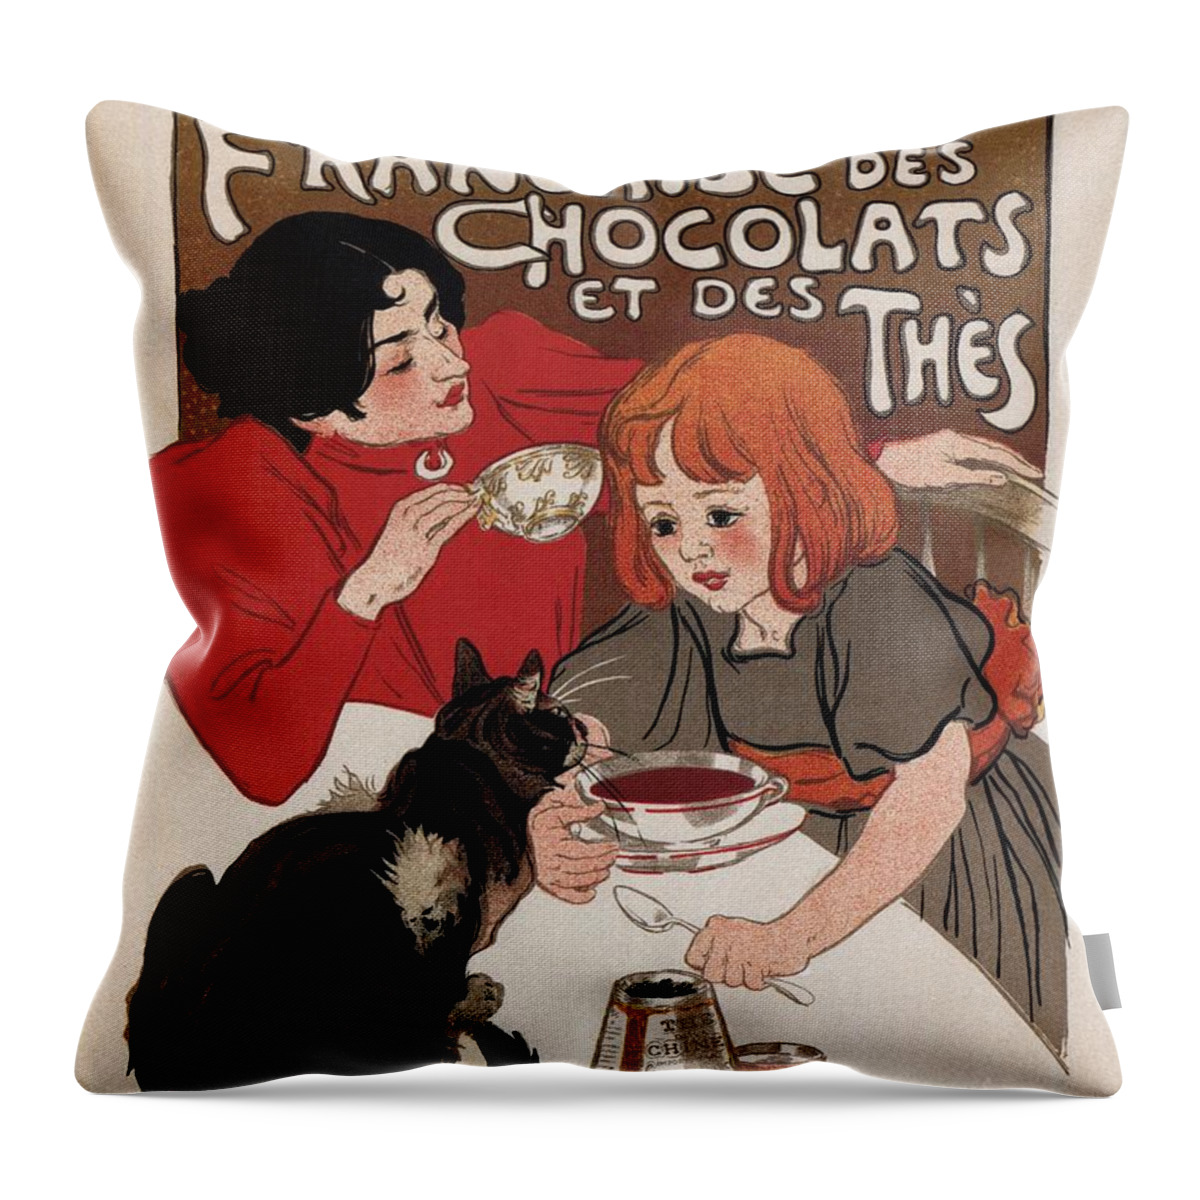 Chocolate Throw Pillow featuring the mixed media Compagnie Francaise Des Chocolats Et Des Thes - Vintage Chocolate and Tea Advertising Poster by Studio Grafiikka